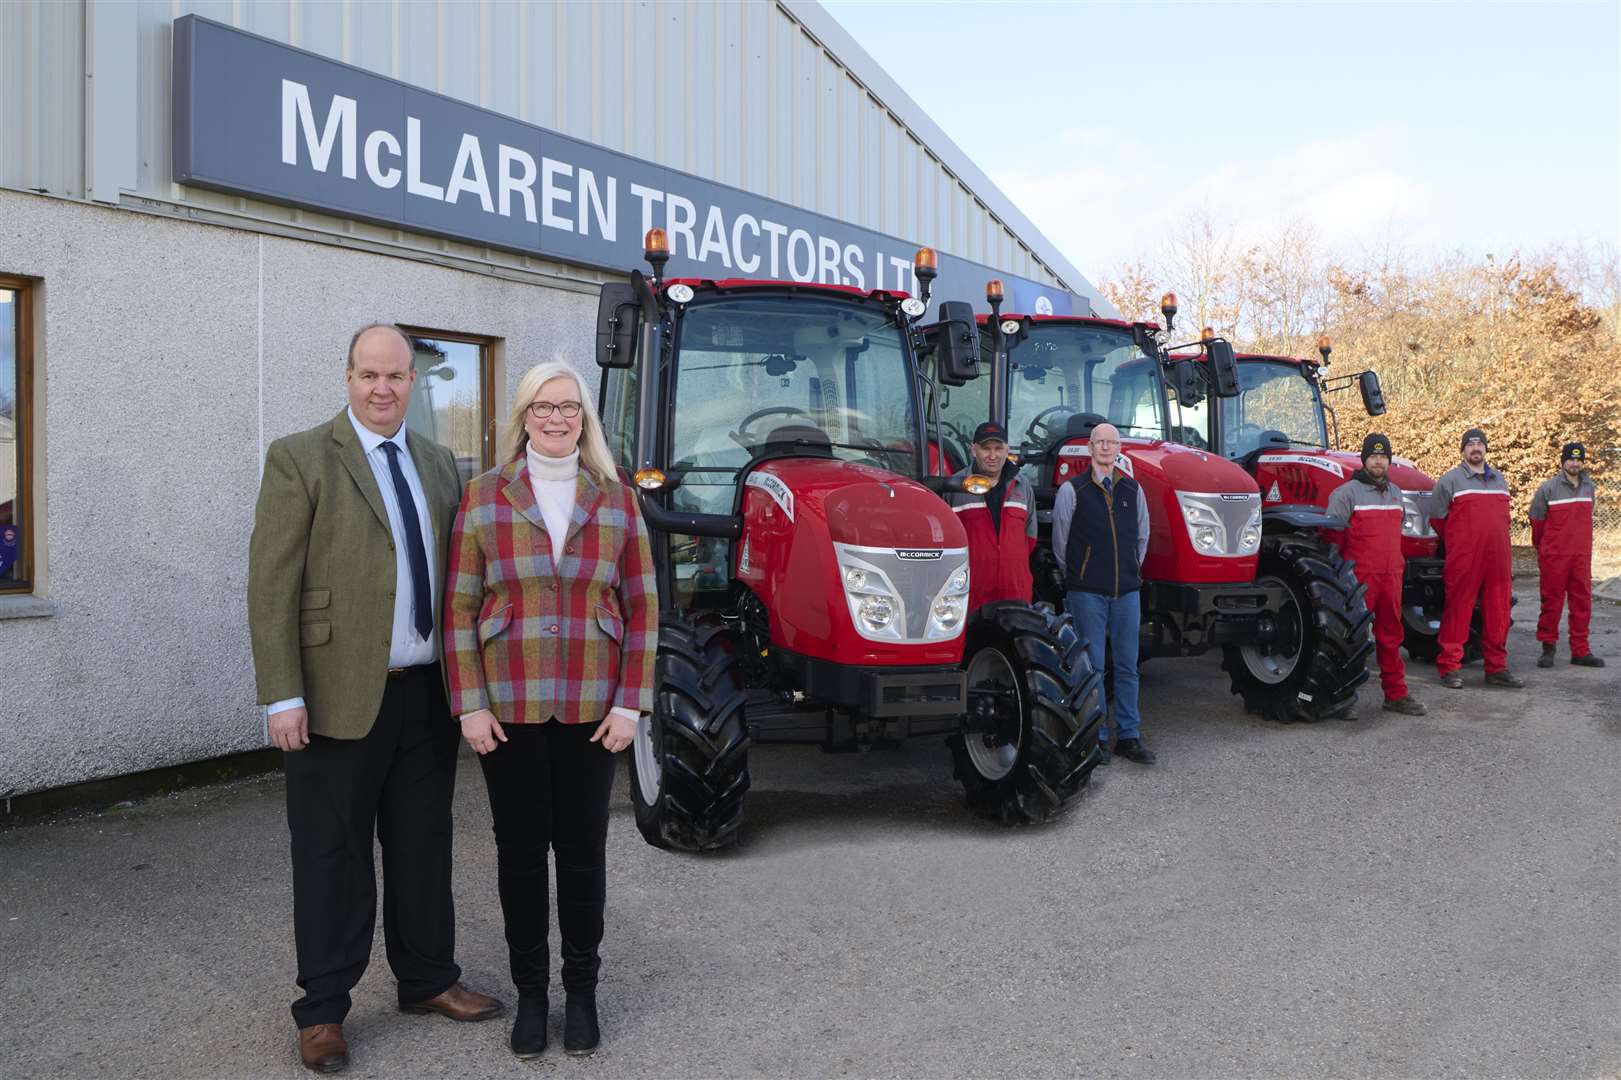 George and Fiona McLaren with the team from McLaren Tractors, sponsor of the public servant of the year award.